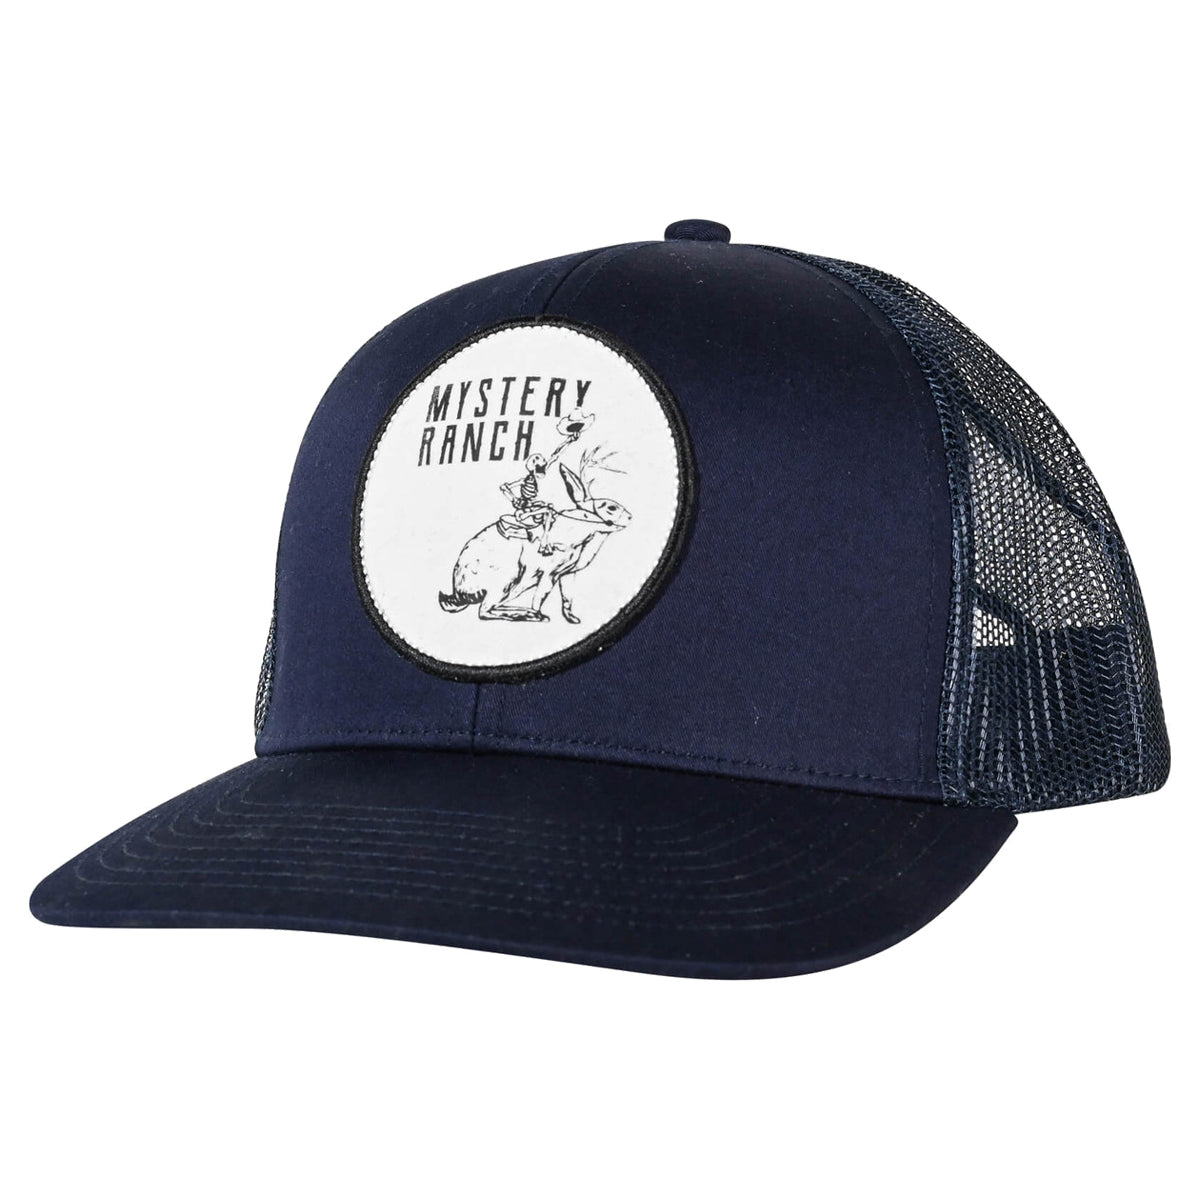 Mystery Ranch Ranch Rider Trucker Hat in Navy by GOHUNT | Mystery Ranch - GOHUNT Shop